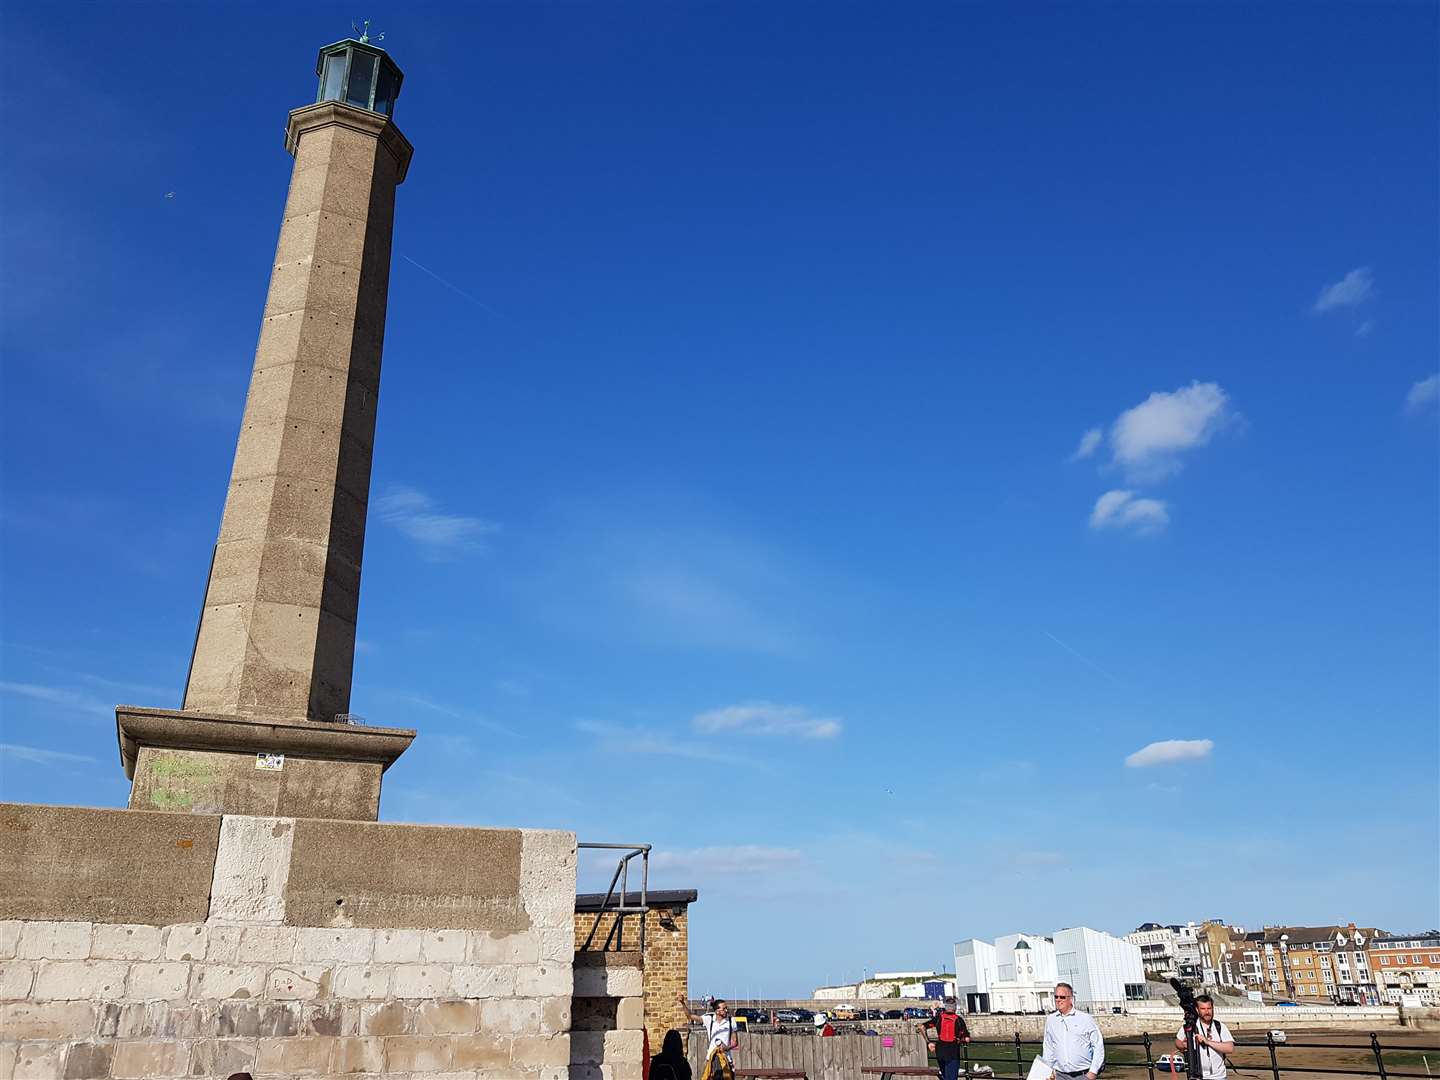 The end of the Harbour Arm in Margate - as seen in Killing Eve and Only Fools and Horses